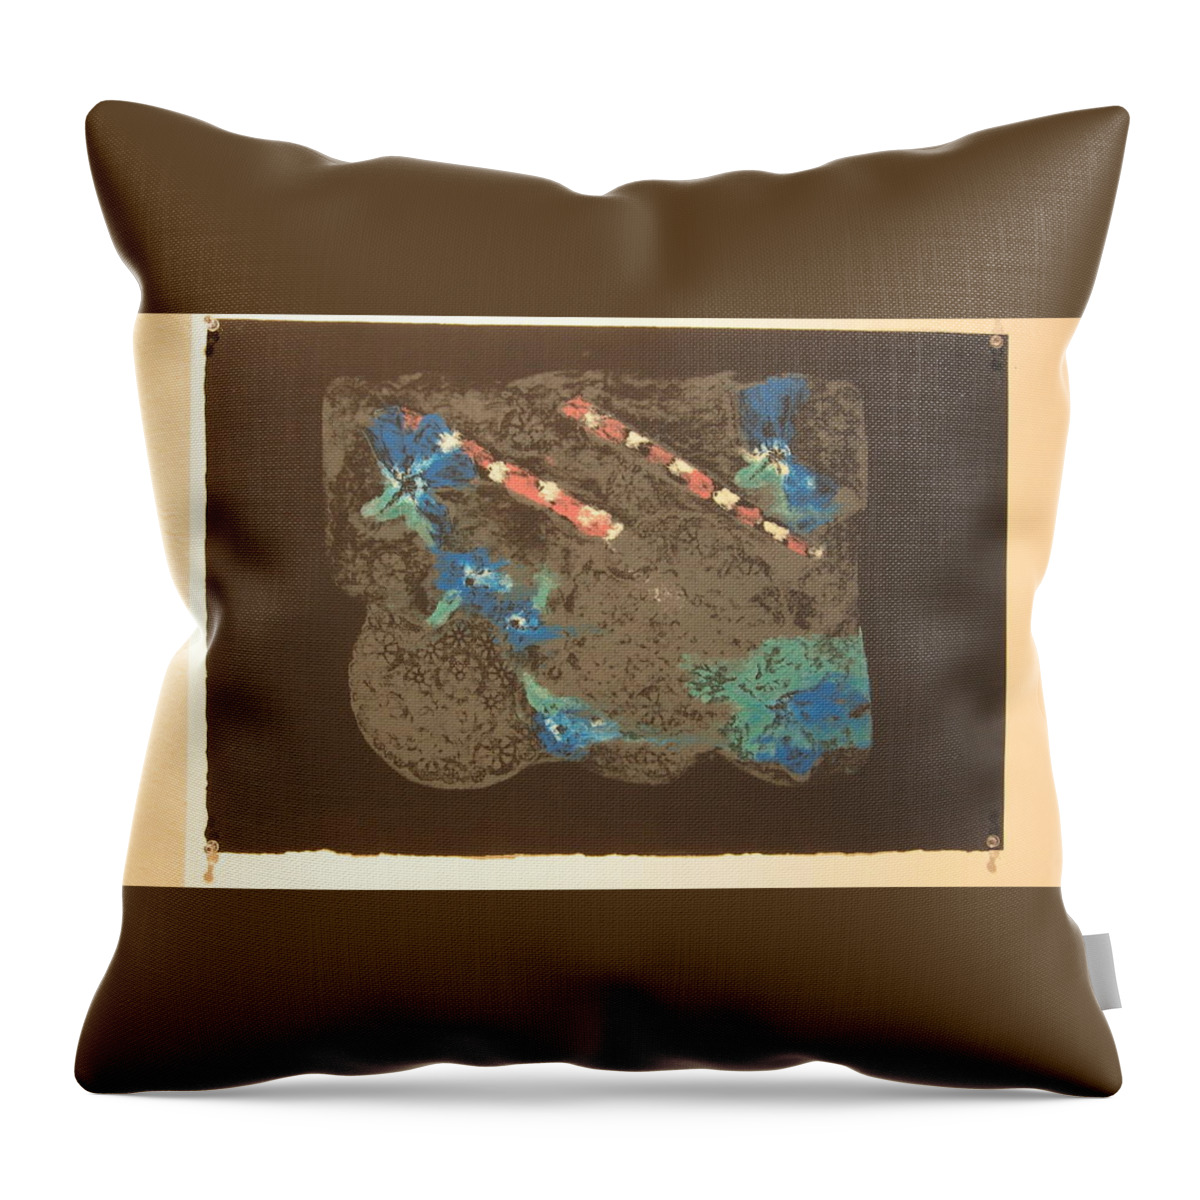  Throw Pillow featuring the mixed media Muted by Erika Jean Chamberlin